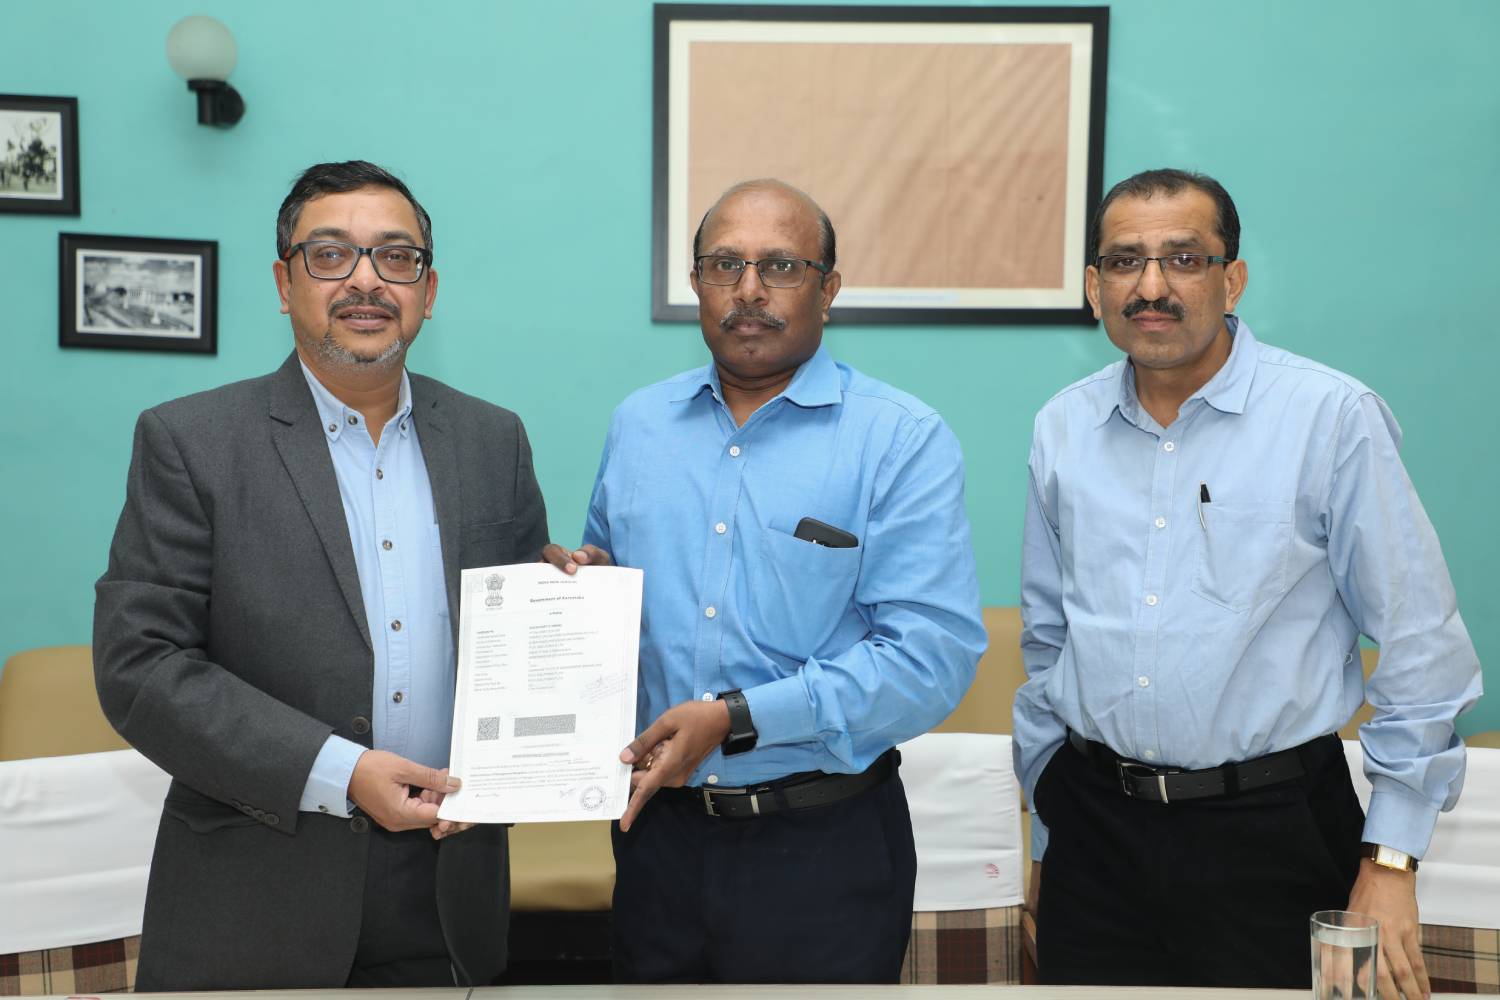 Col. (Retd.) S.D. Aravendan (centre), Chief Administrative Officer, IIMB, and Mr. Shoubhik Dasgupta (left), COO, Pi EV Solutions Pvt Ltd., an electric vehicle charging solutions provider, exchange an agreement for the installation of an EV charging station for two-wheelers and four-wheelers on campus. Mr. Vasudeva M, Chief Manager, Infrastructure at IIMB, looks on.